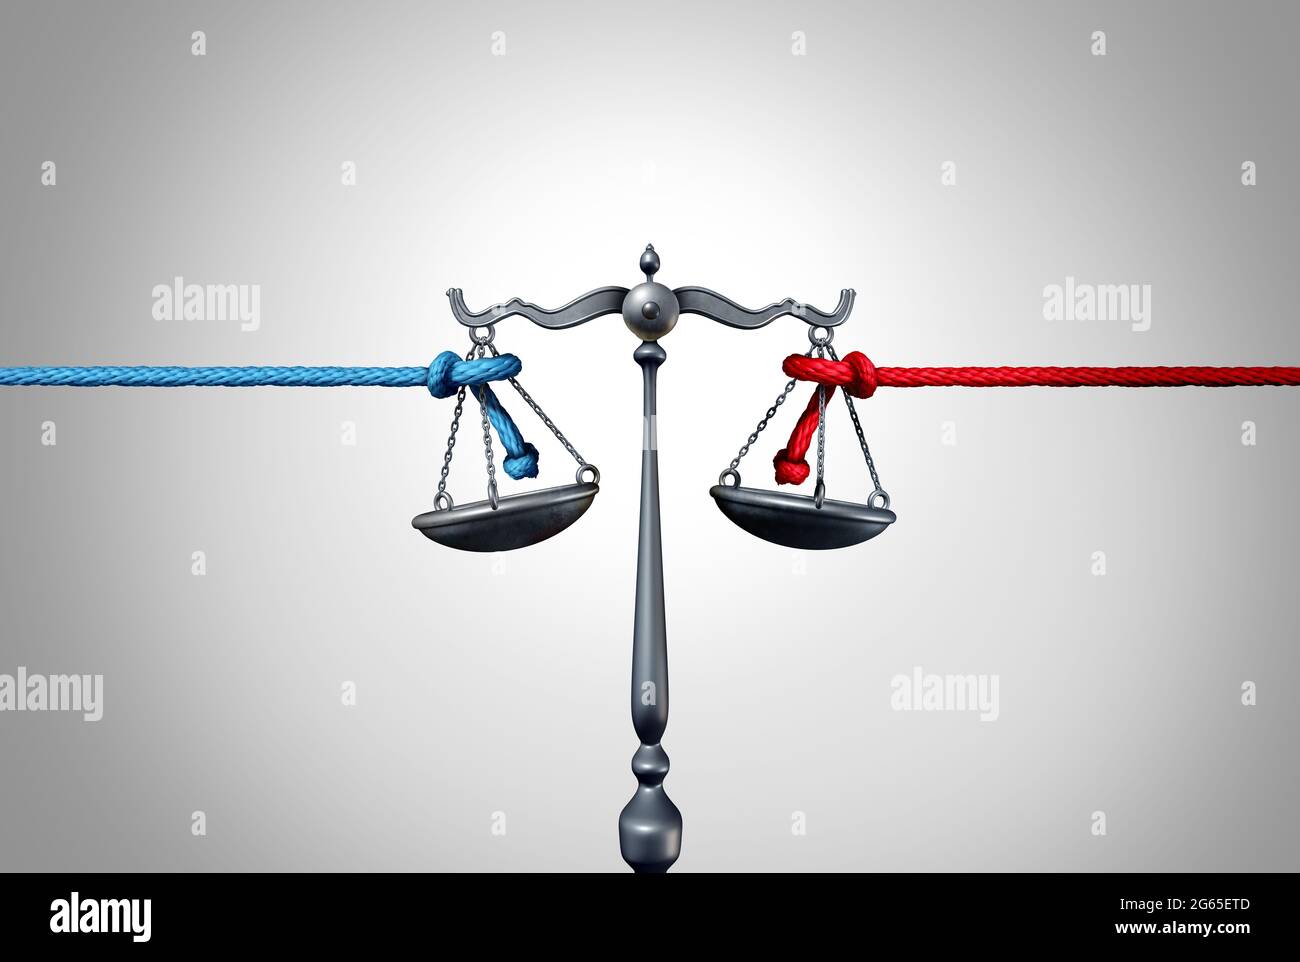 Politics and law or political legislation fight as a left and right leaning rope in a tug of war struggling to win social ideology justice representin Stock Photo